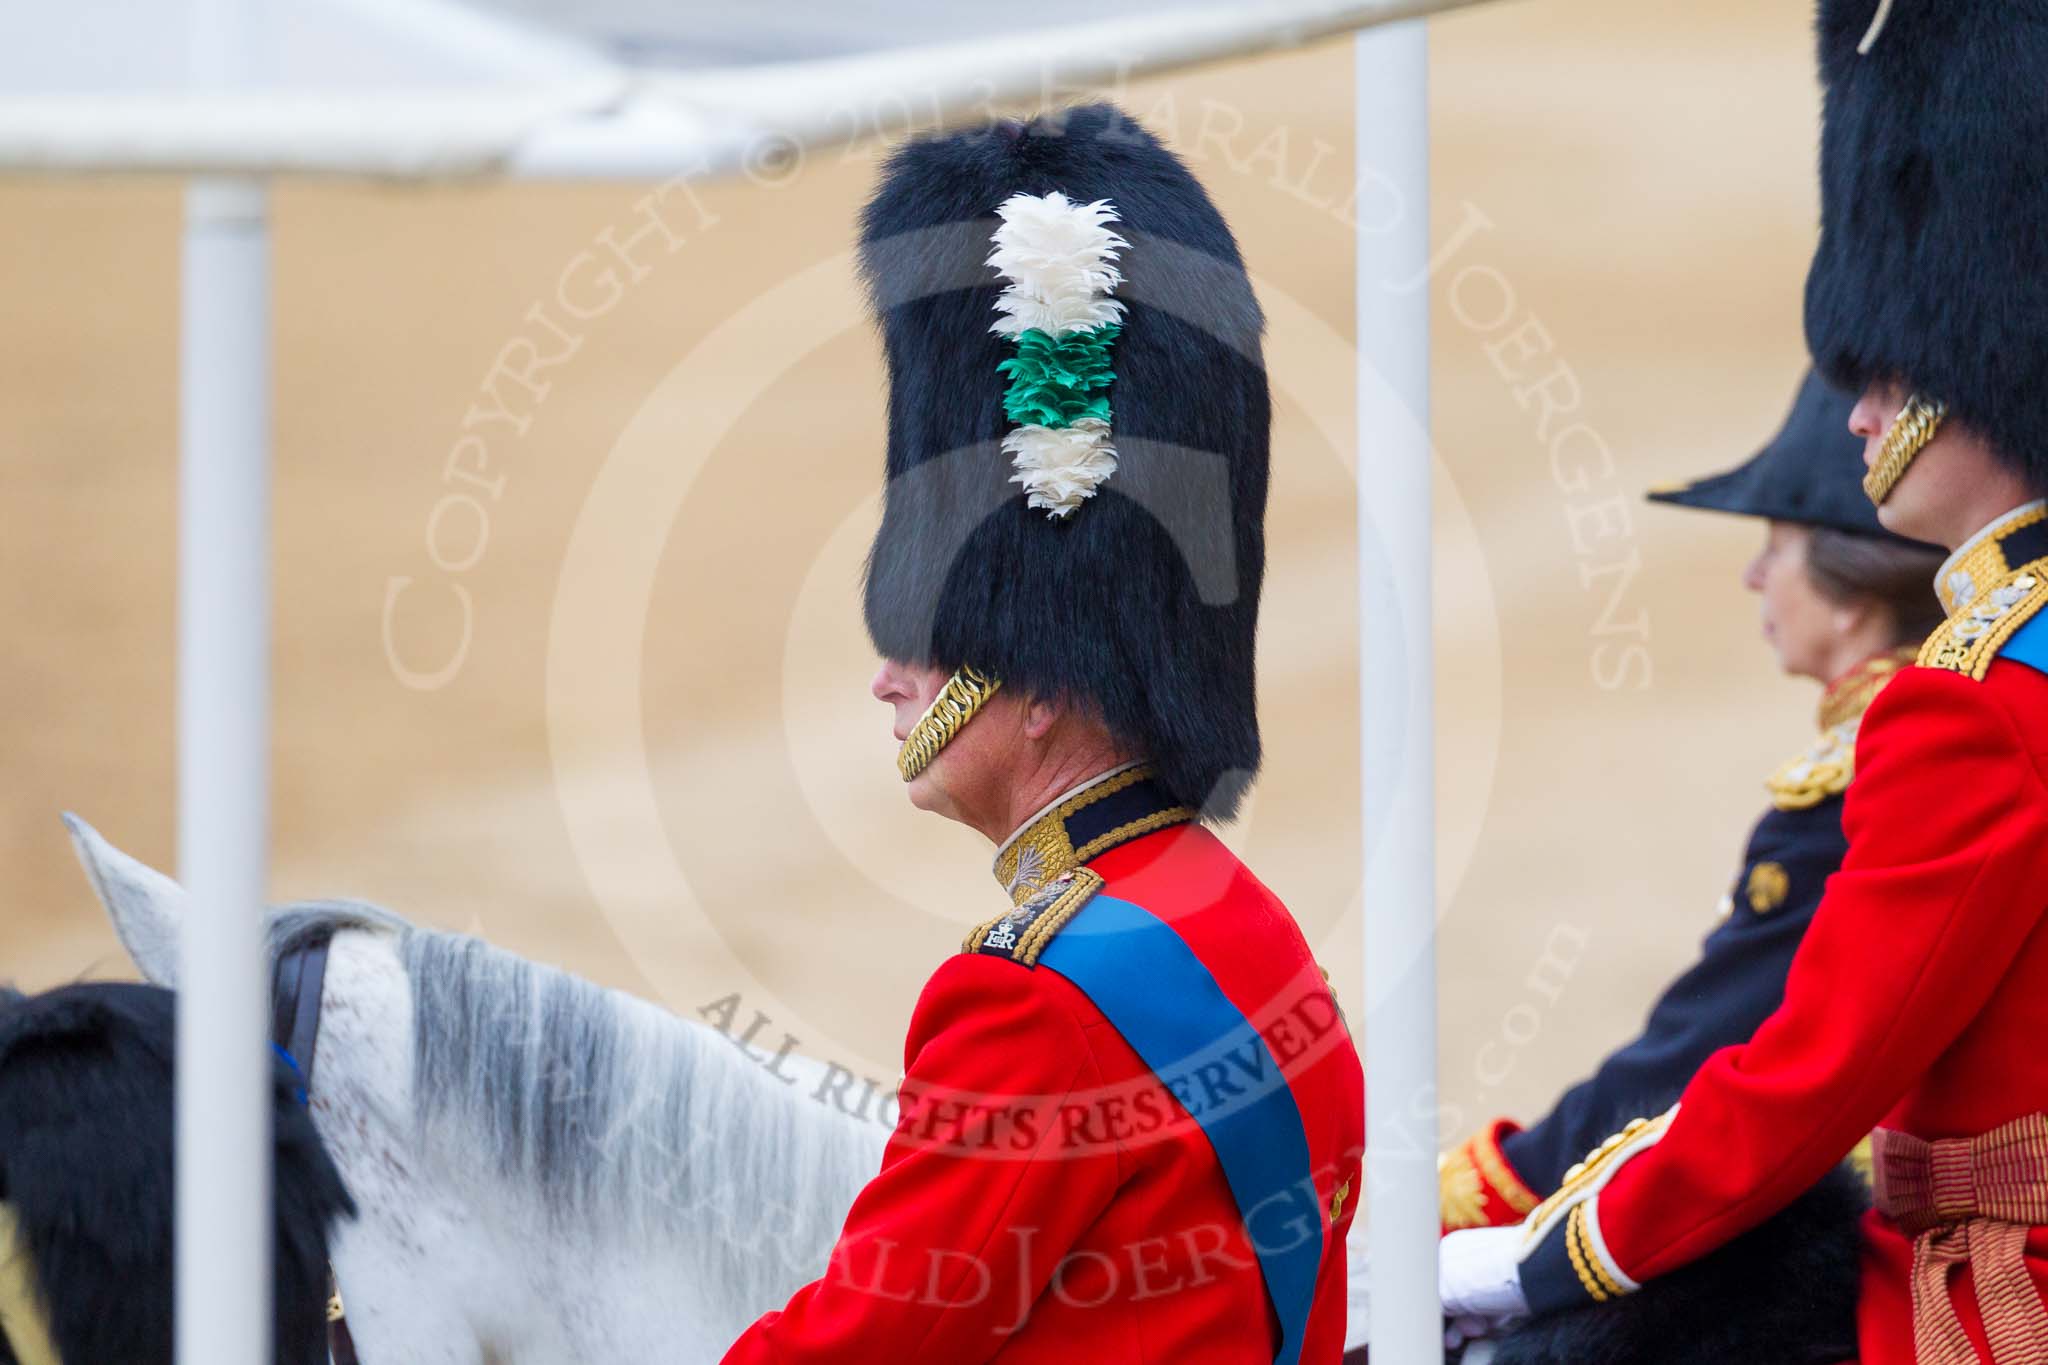 Trooping the Colour 2015. Image #358, 13 June 2015 11:14 Horse Guards Parade, London, UK